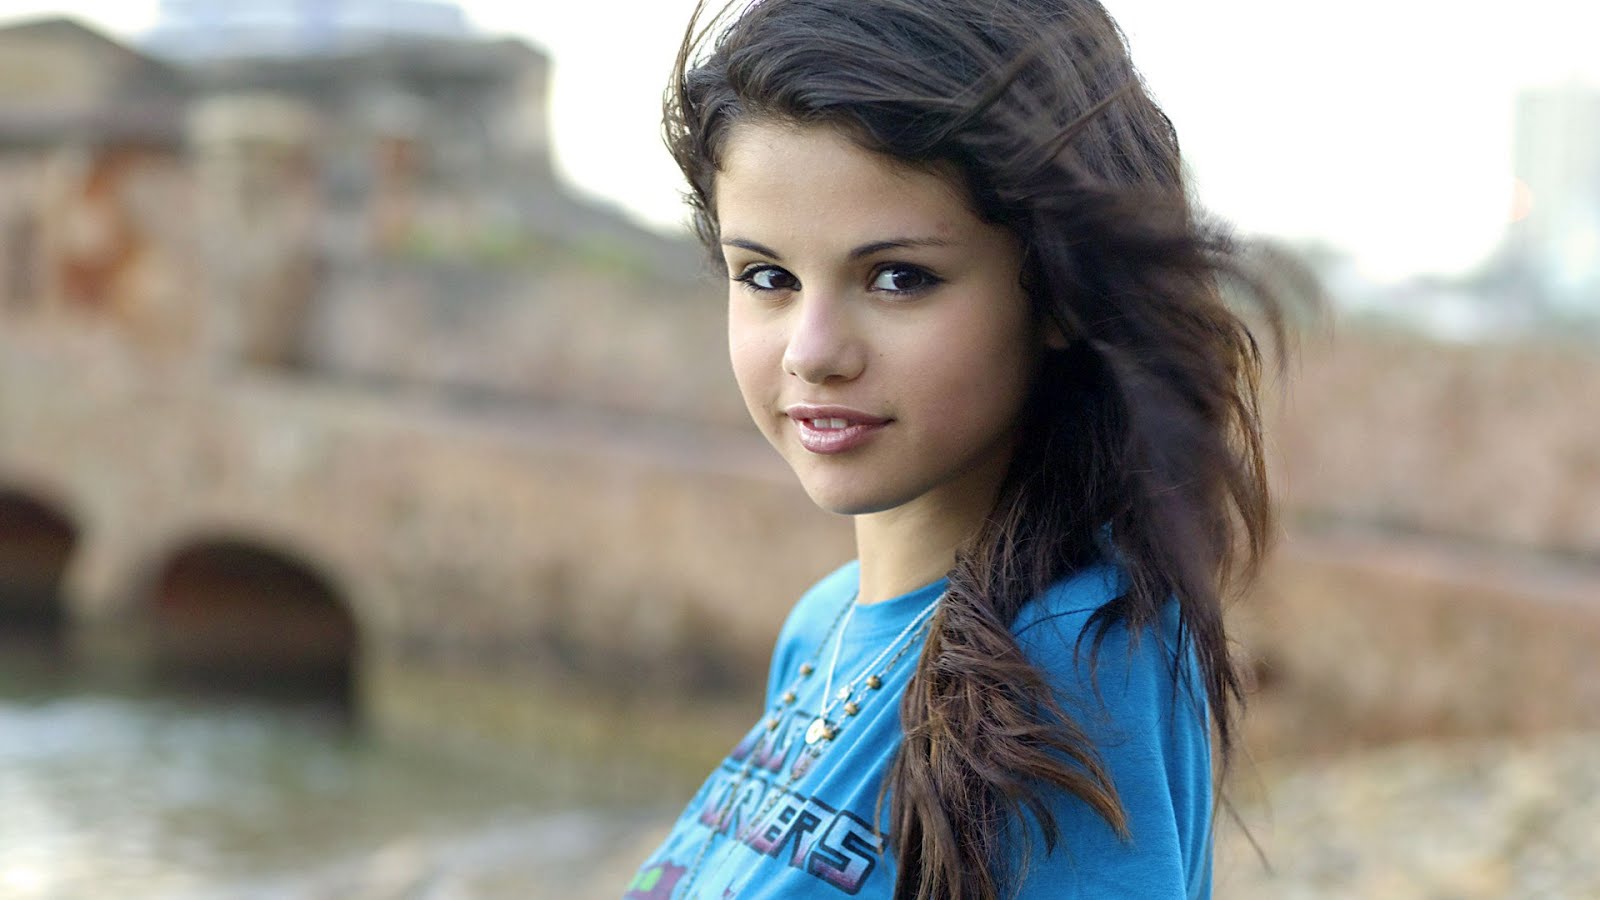 Pictures For Desktop Background Use Selena Gomez Is Most Popular Teen